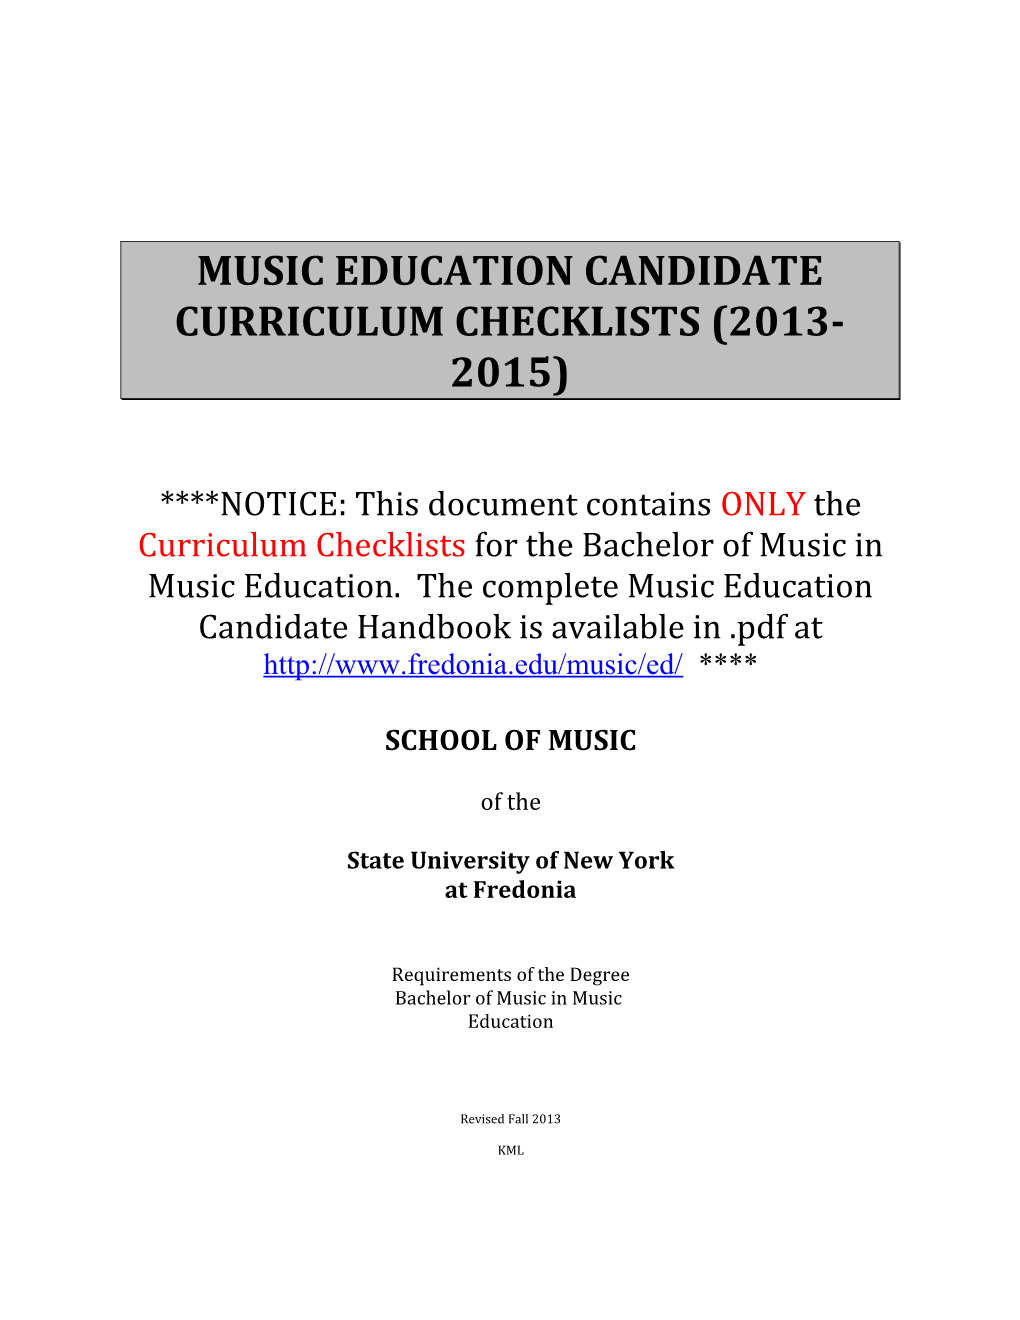 Music Education Candidate Curriculum Checklists (2013-2015)